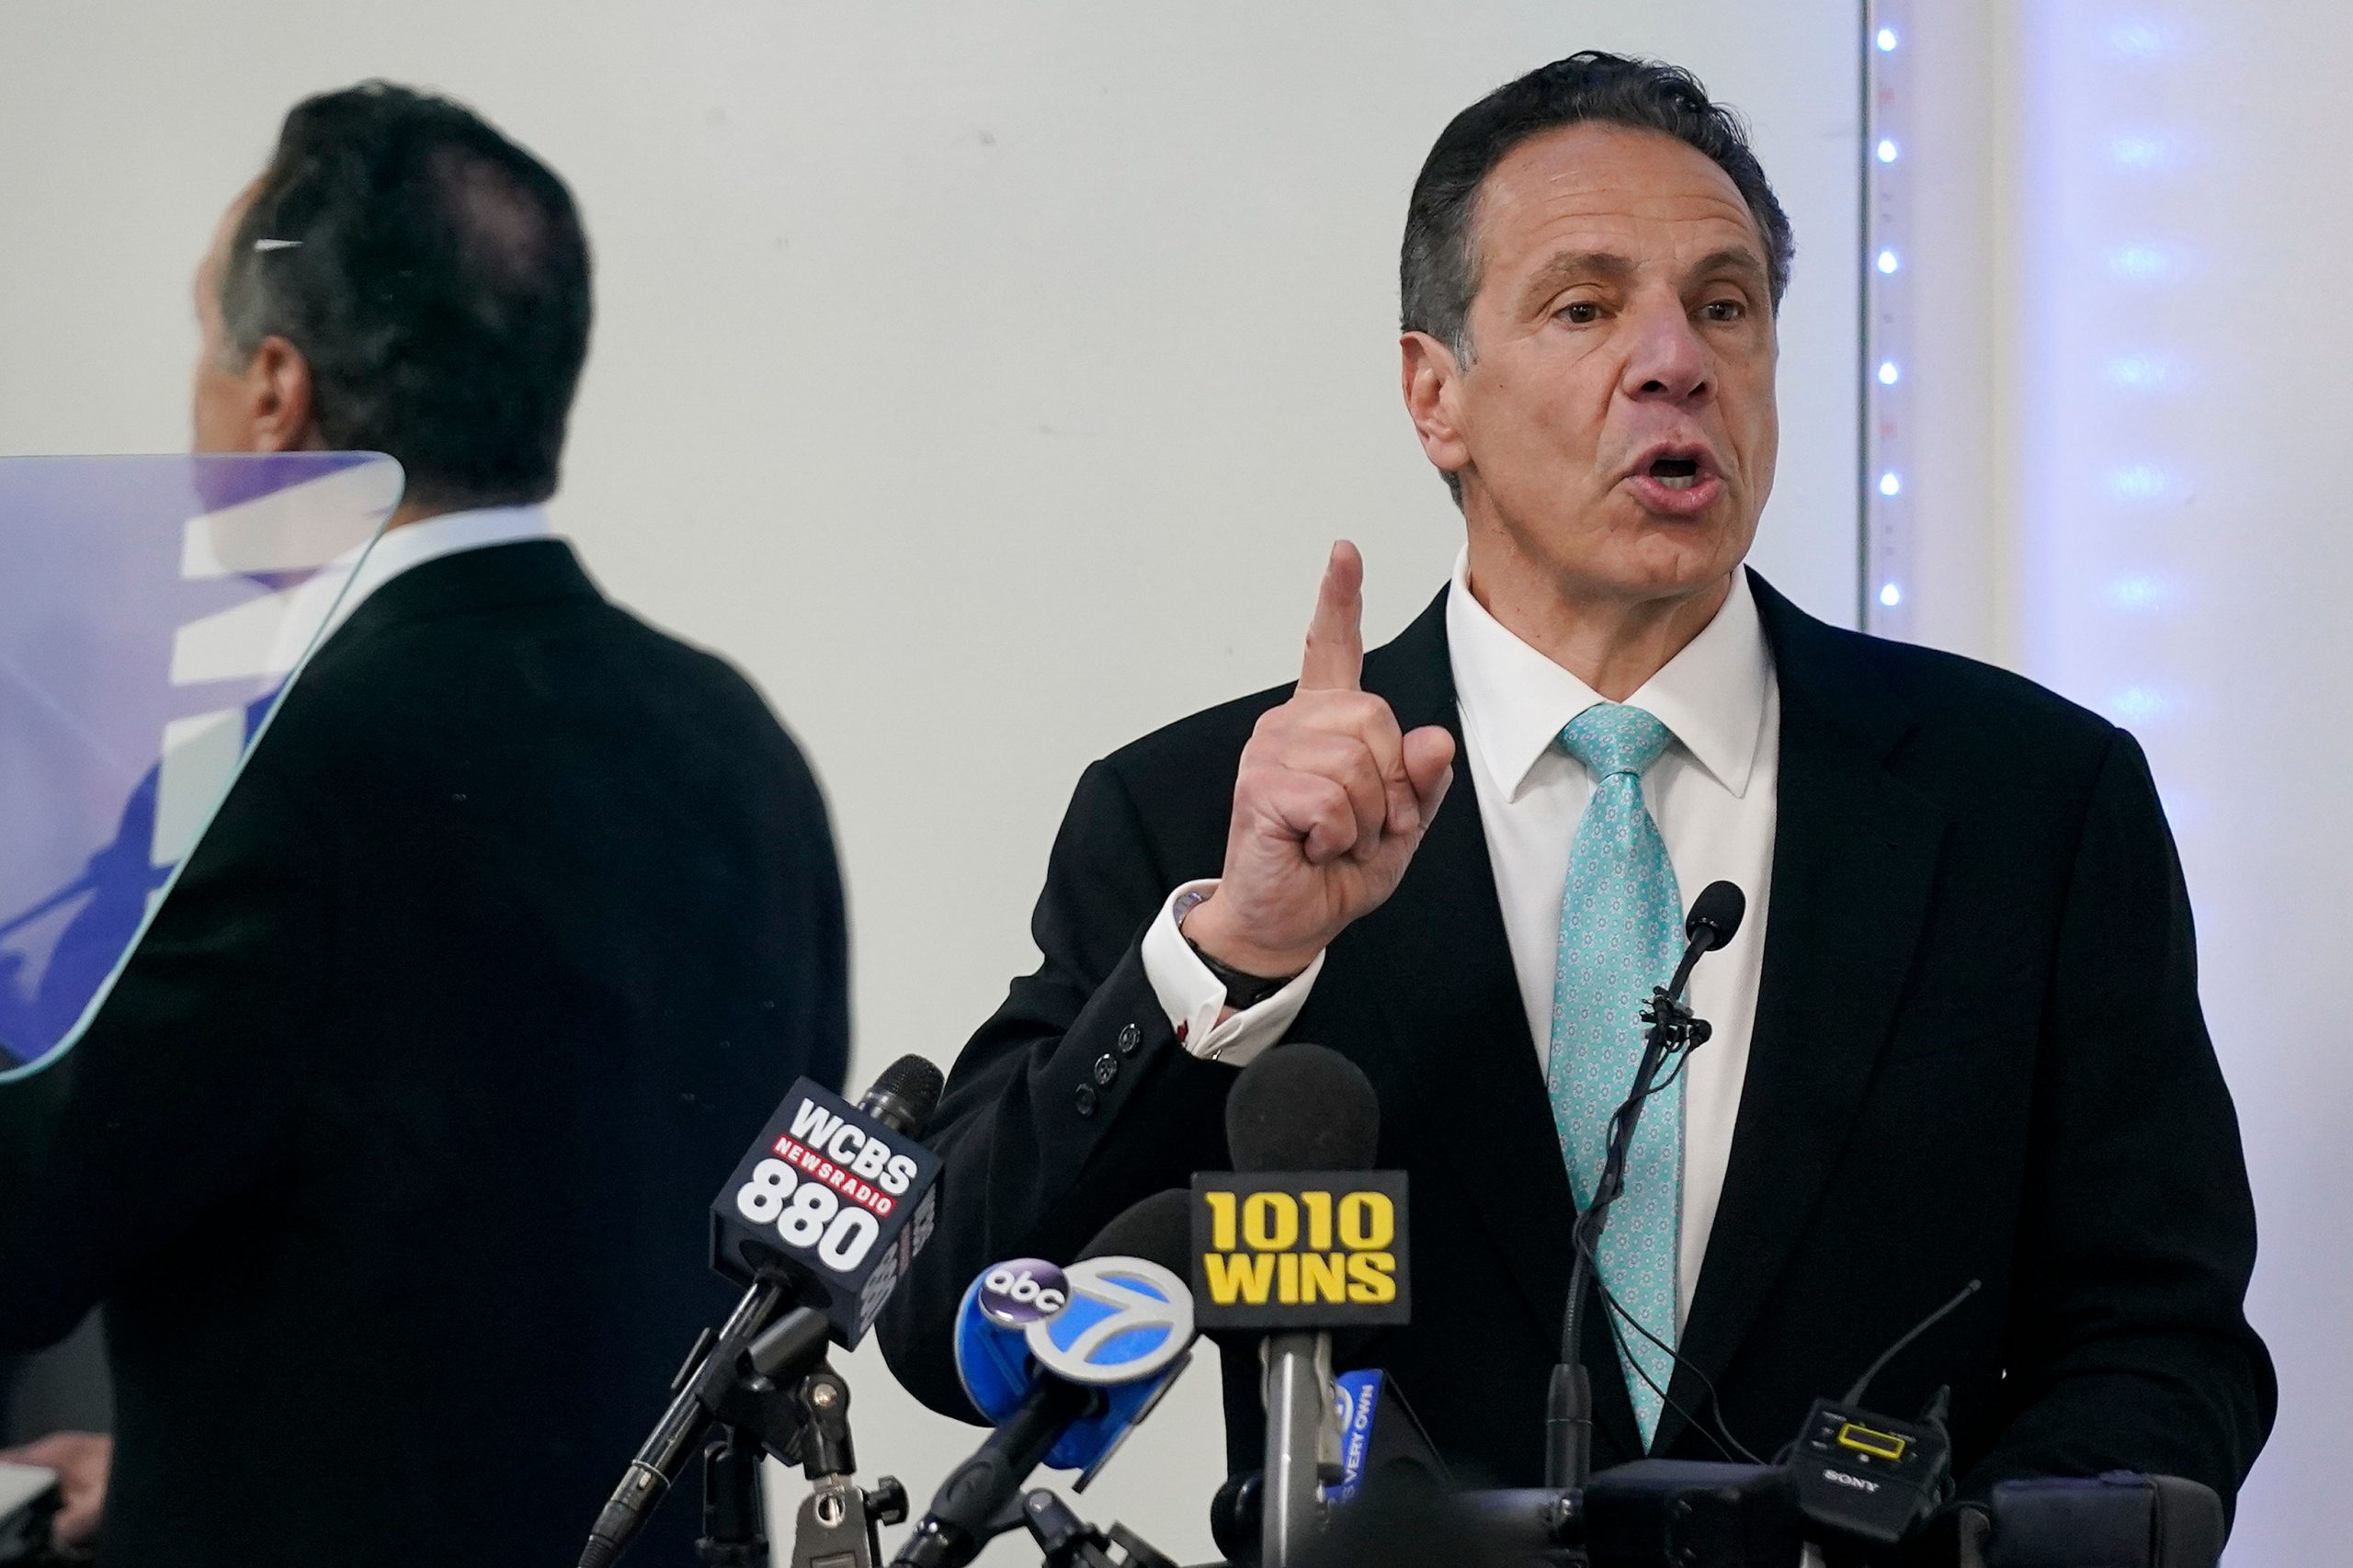 Former New York Governor Andrew Cuomo ‘open to running again’